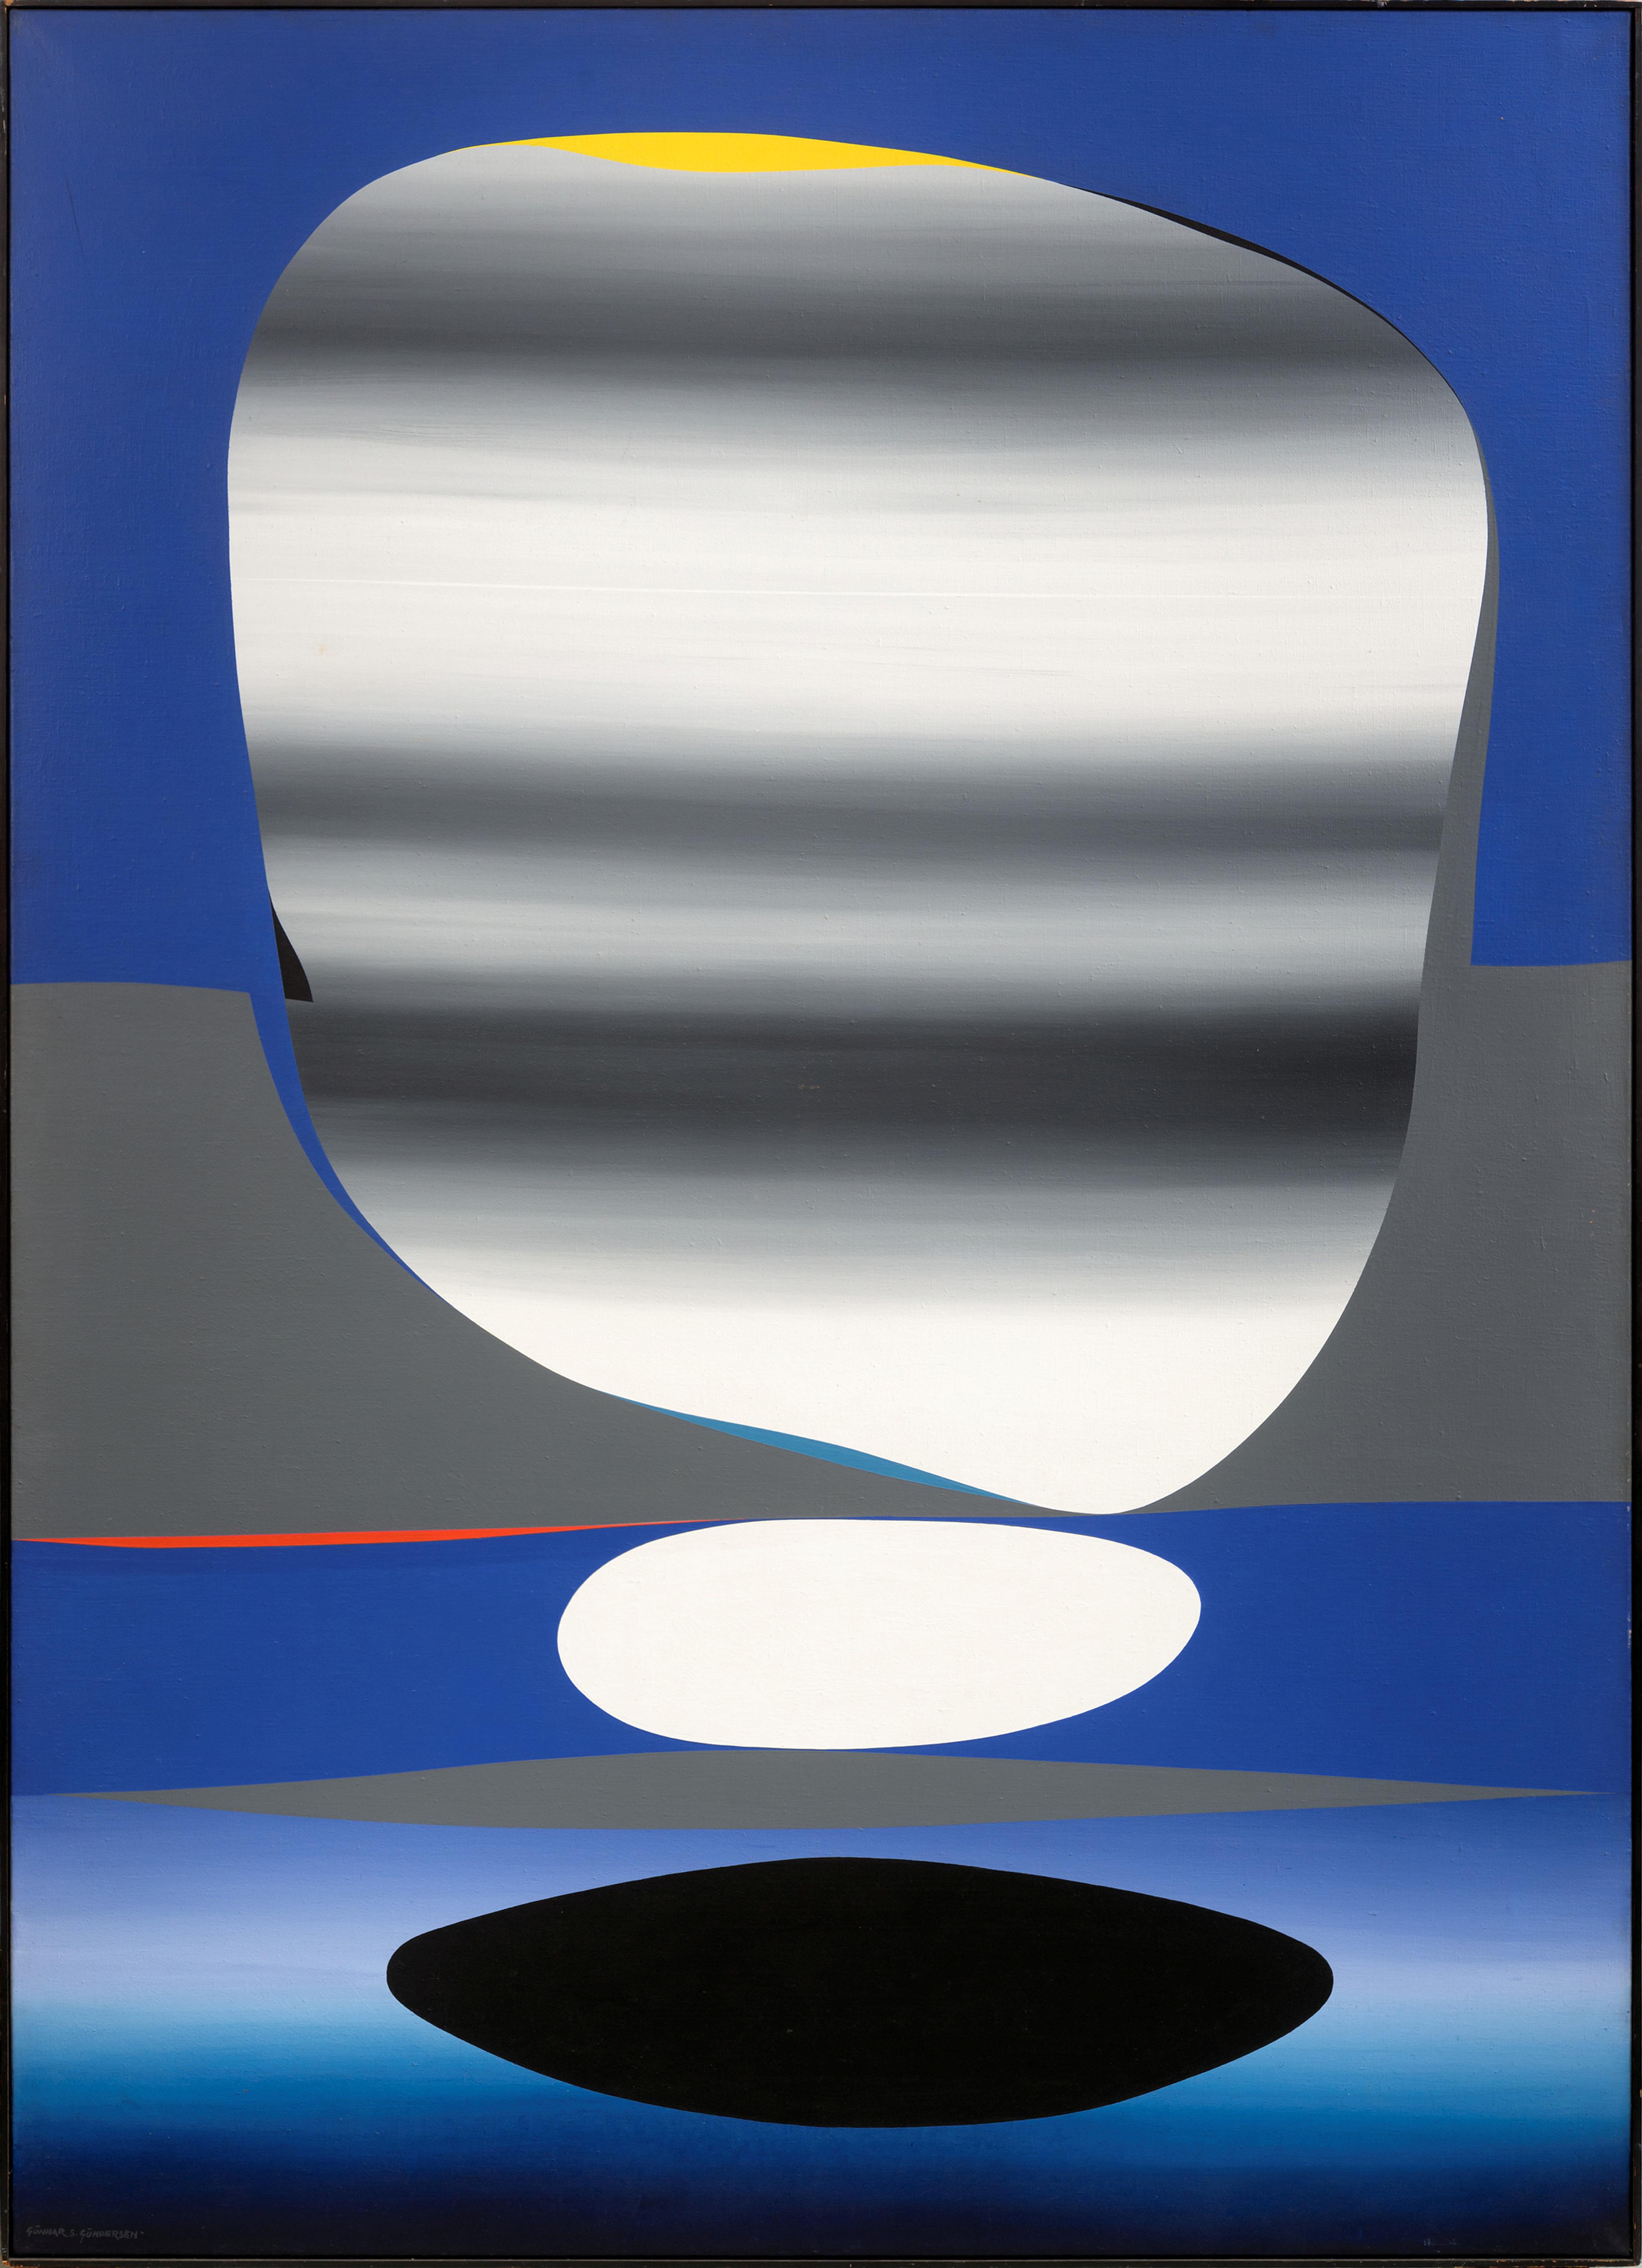 An abstract motif by Gunnar S. Gundersen. A white oval shape against a dark blue and grey background.